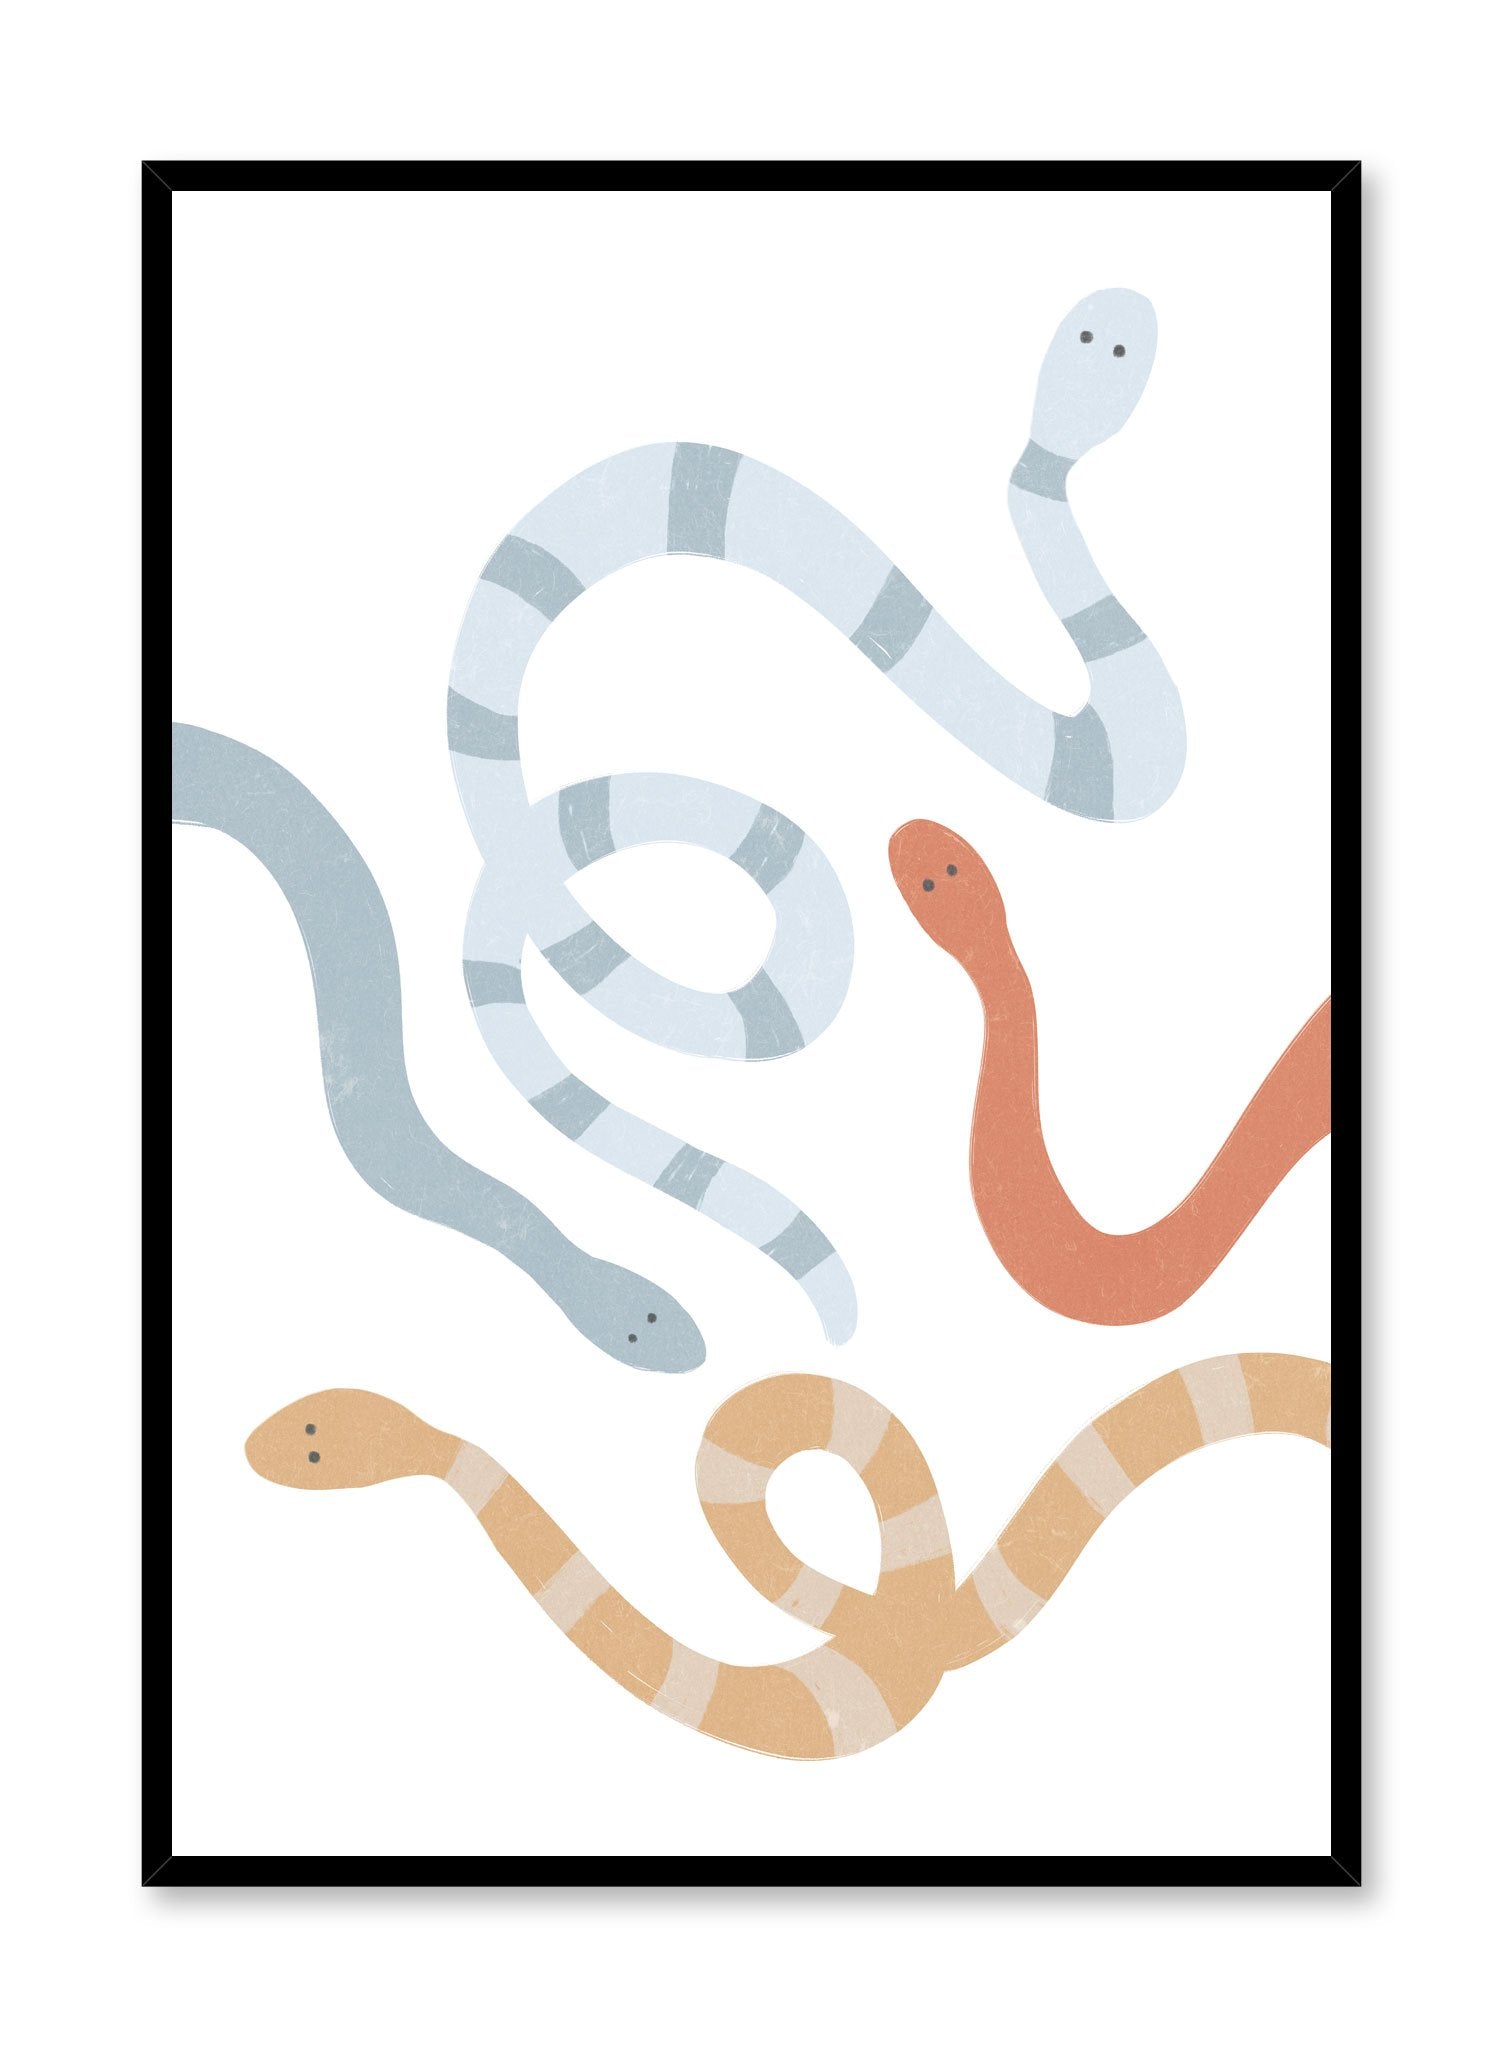 Silly Snakes is a minimalist illustration by Opposite Wall of four colourful snakes, where two are striped, roaming across the poster. 